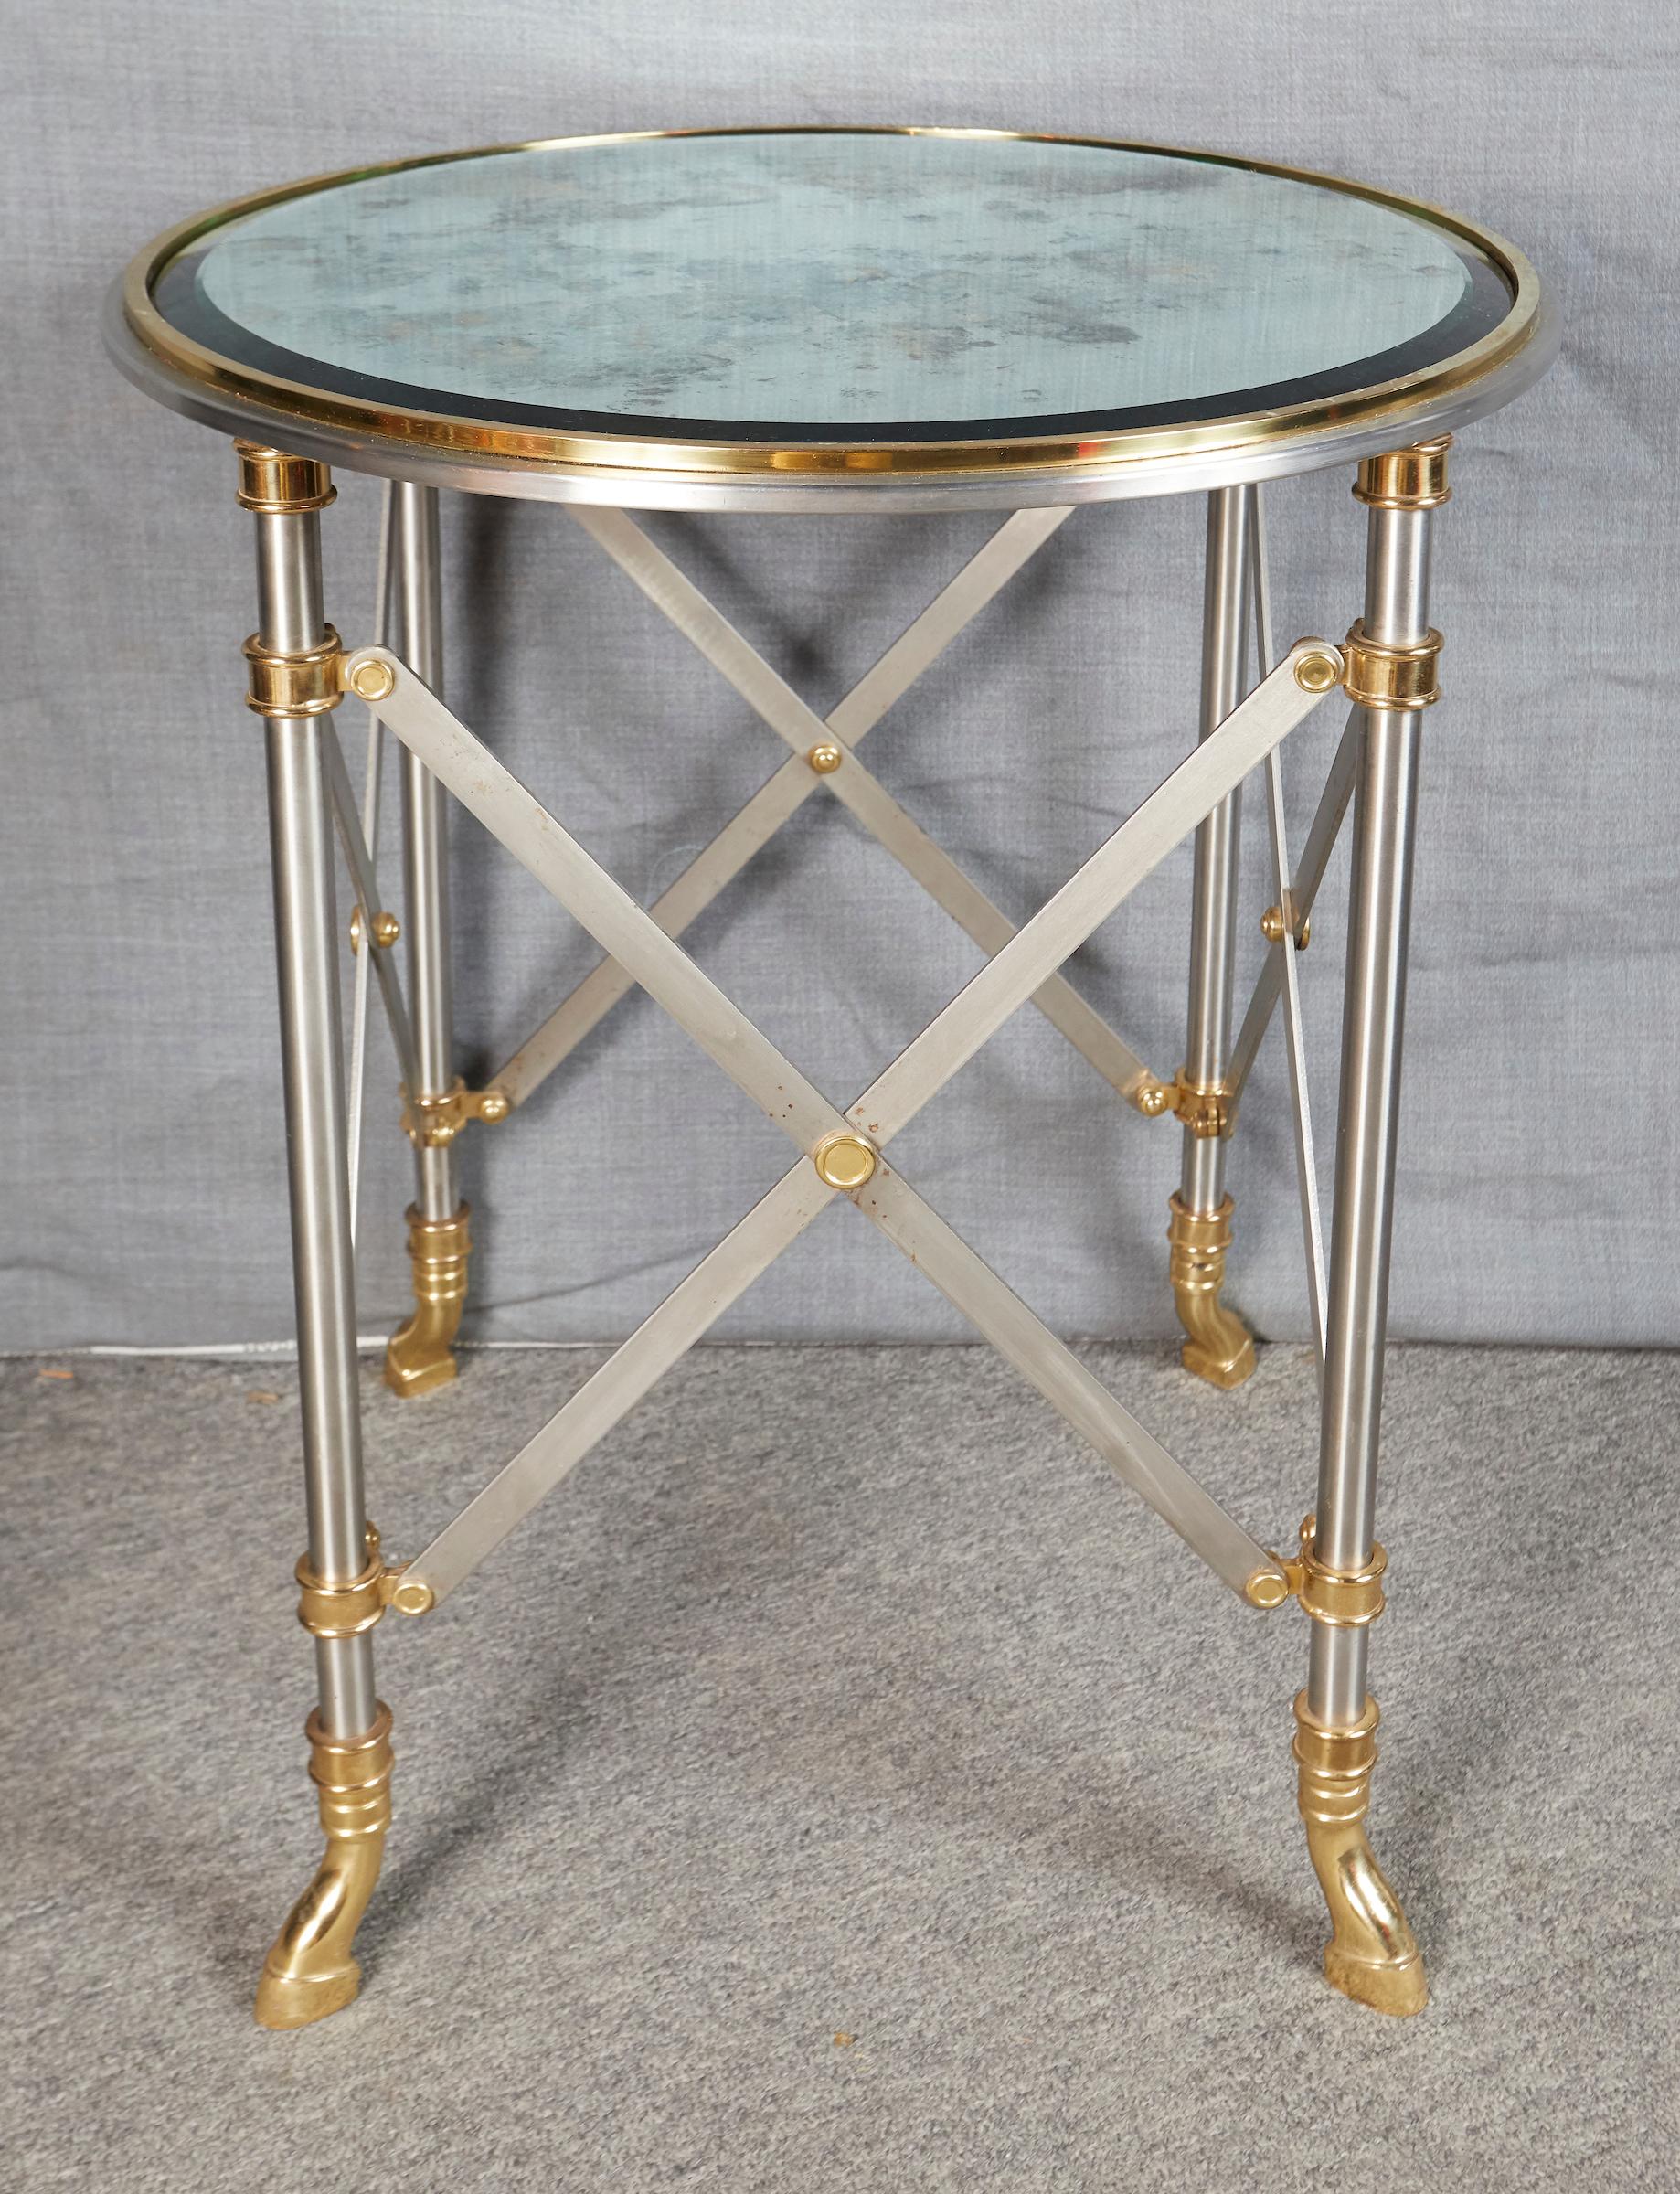 Mid-20th Century Pair of Brass and Polished Steel Side Tables by Maison Jansen